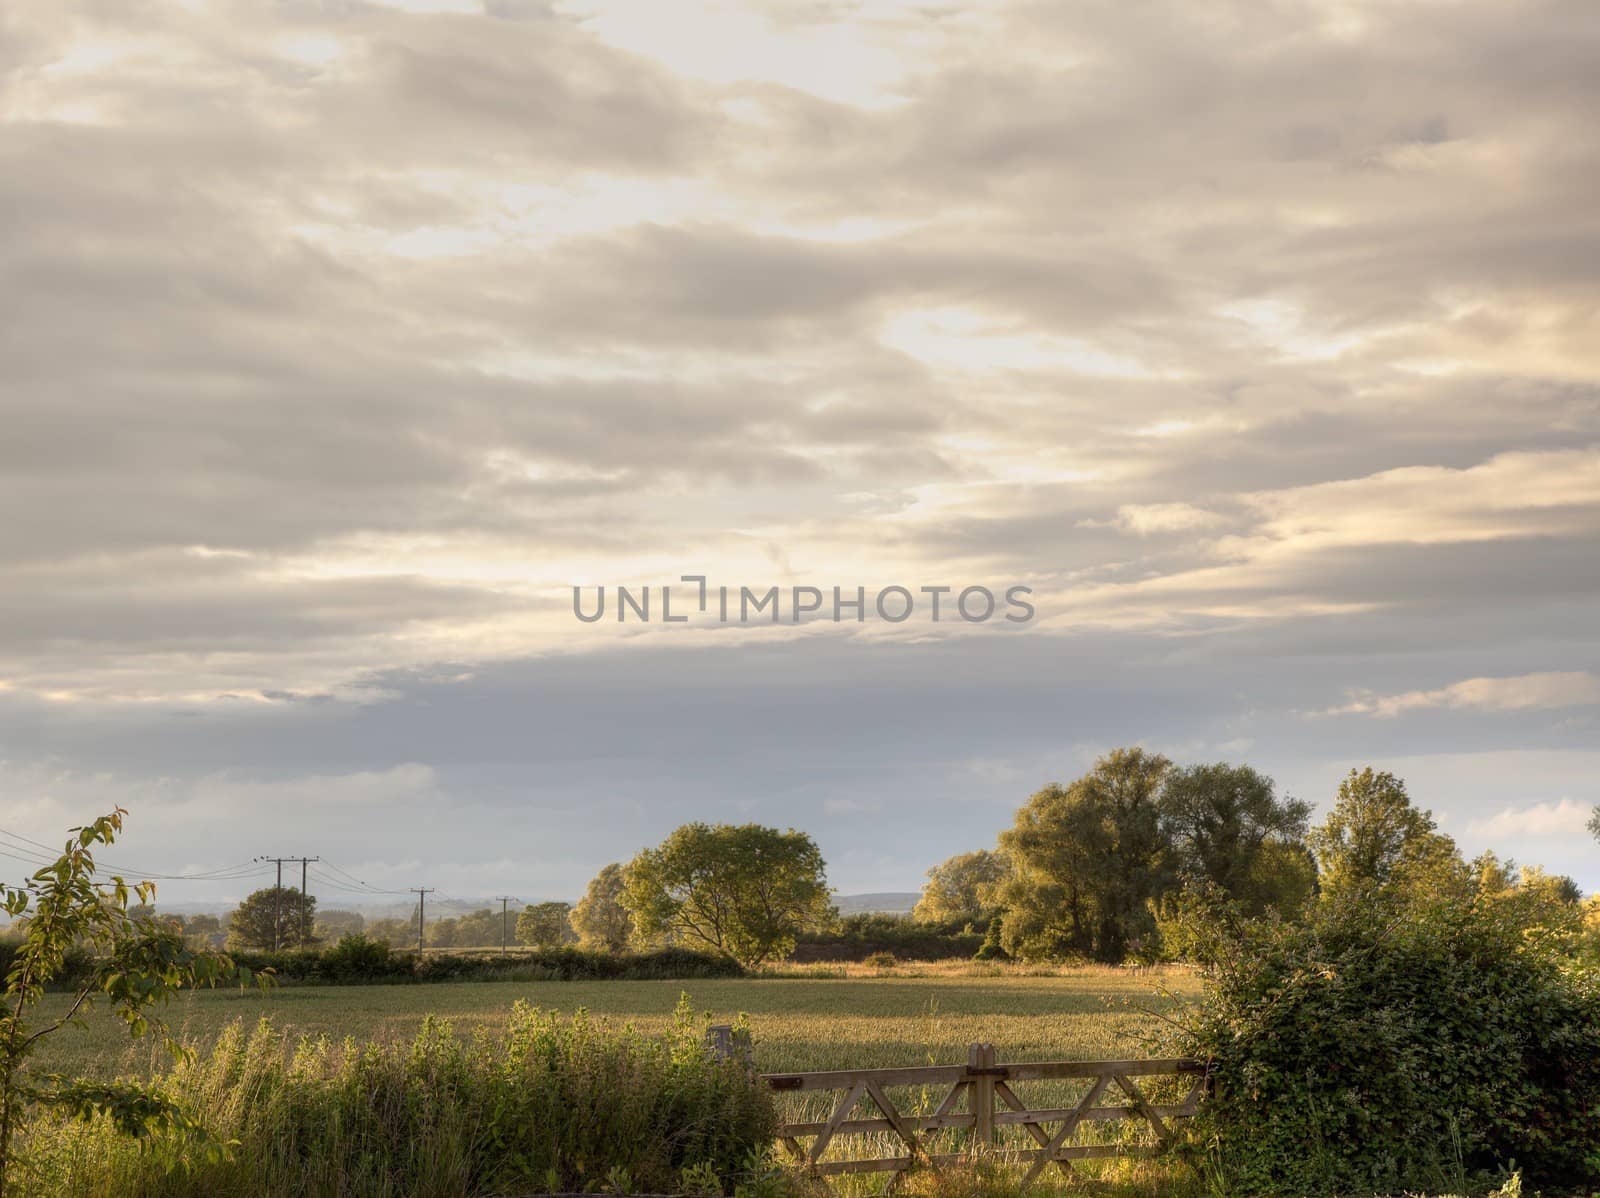 Field and gate background at sunset, Gloucestershire, England.